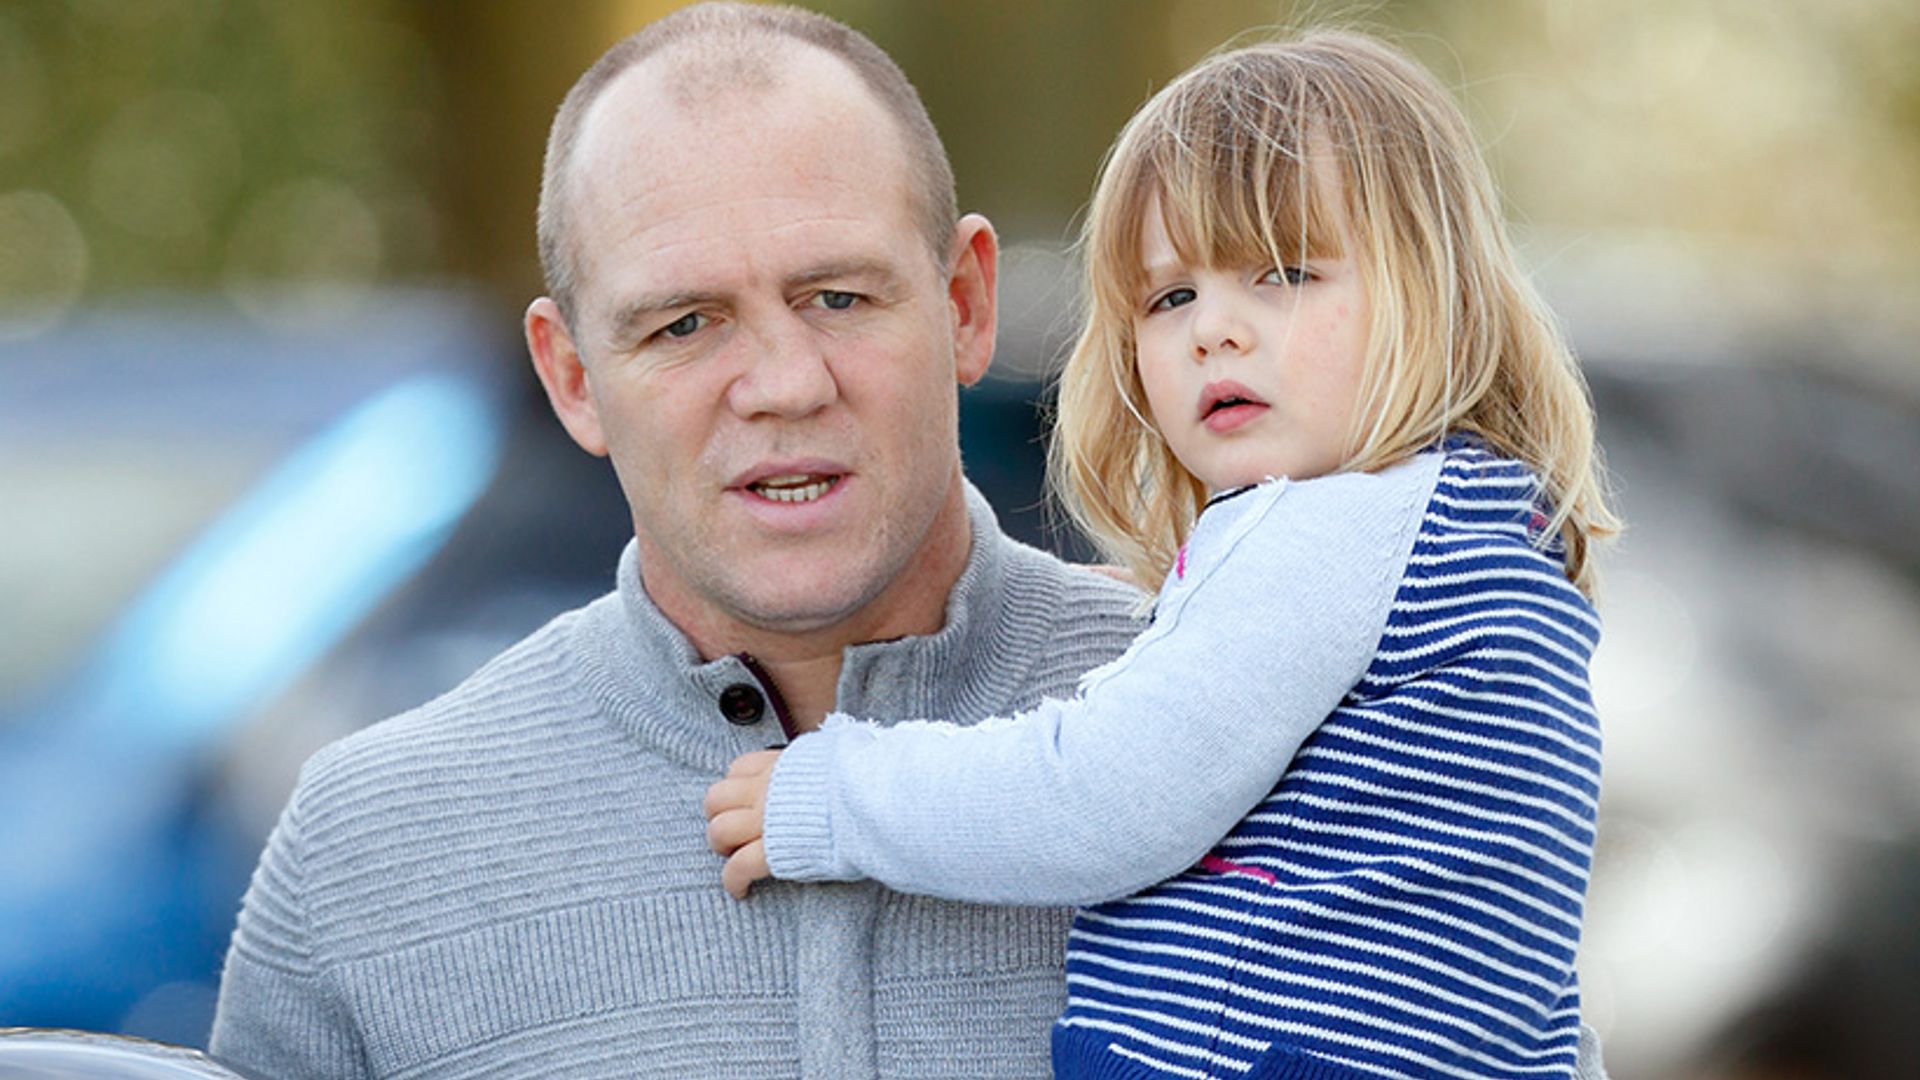 Mike Tindall opens up about daughter Mia's scene-stealing handbag moment in the Queen's 90th birthday portrait